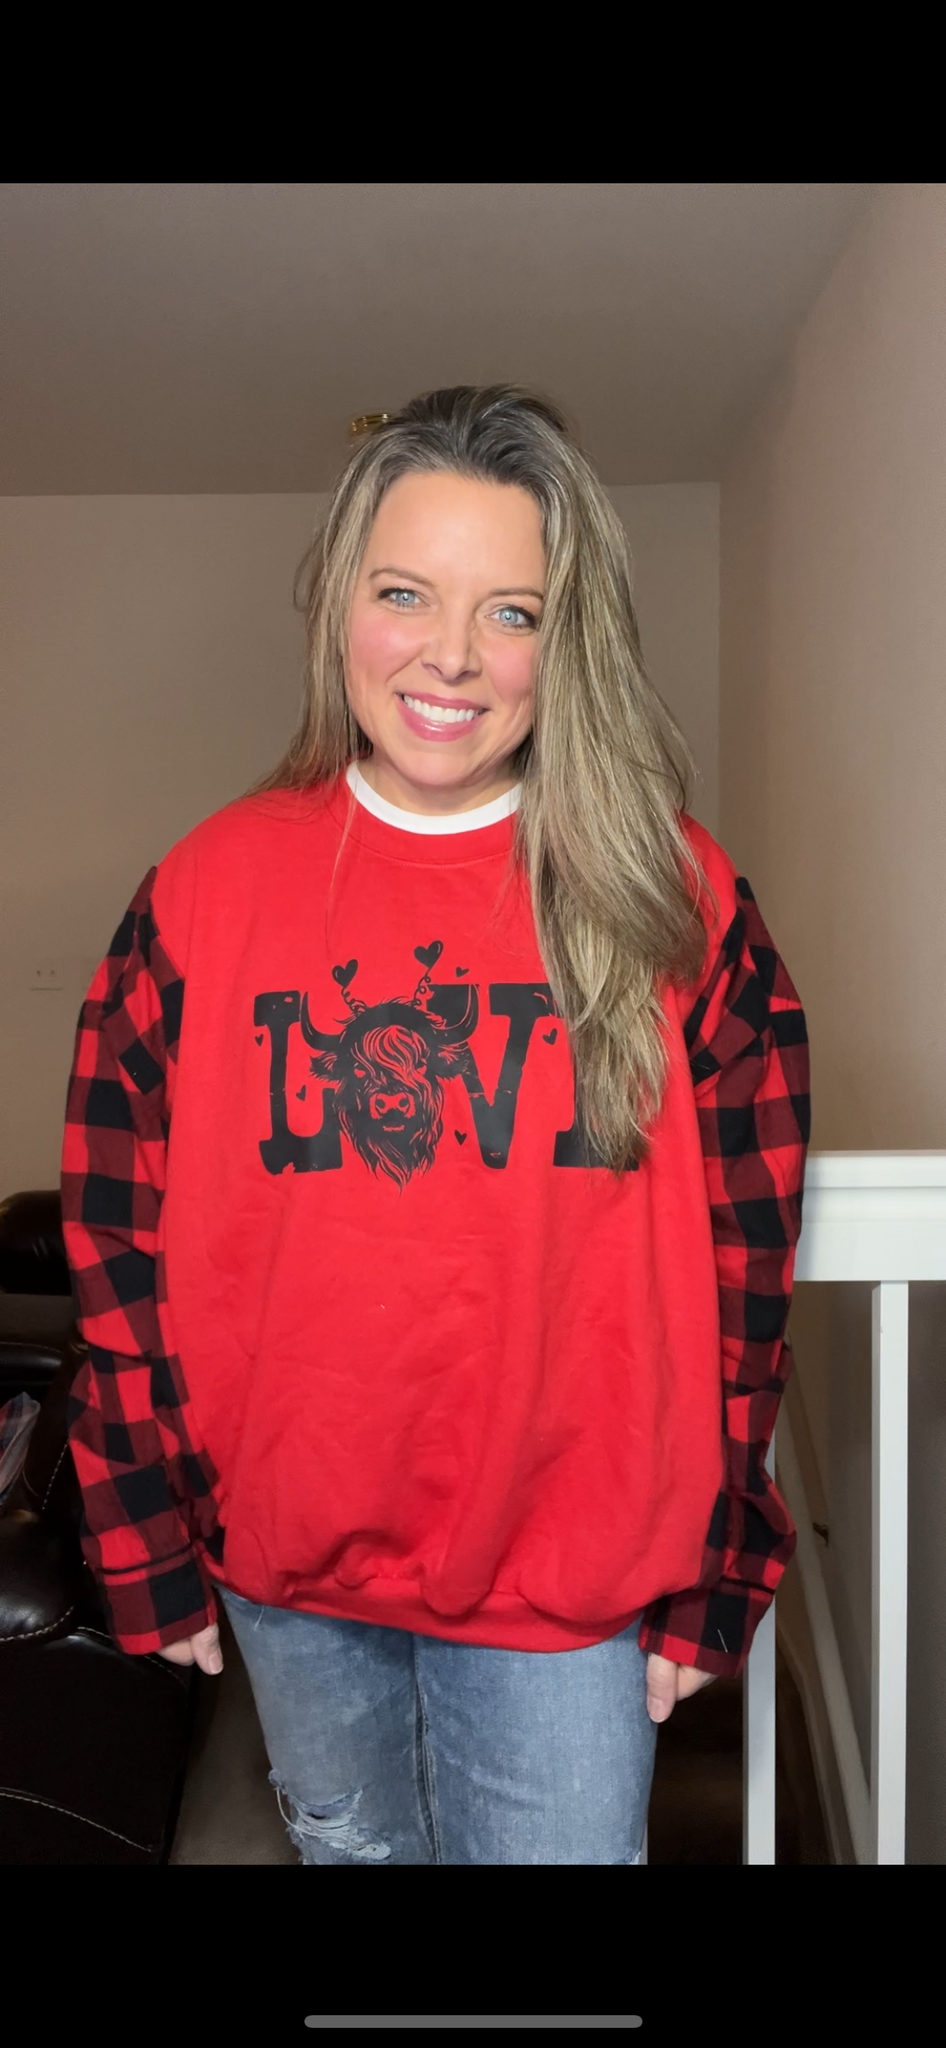 Love Cow – women’s XL – thin sweatshirt with flannel sleeves ￼